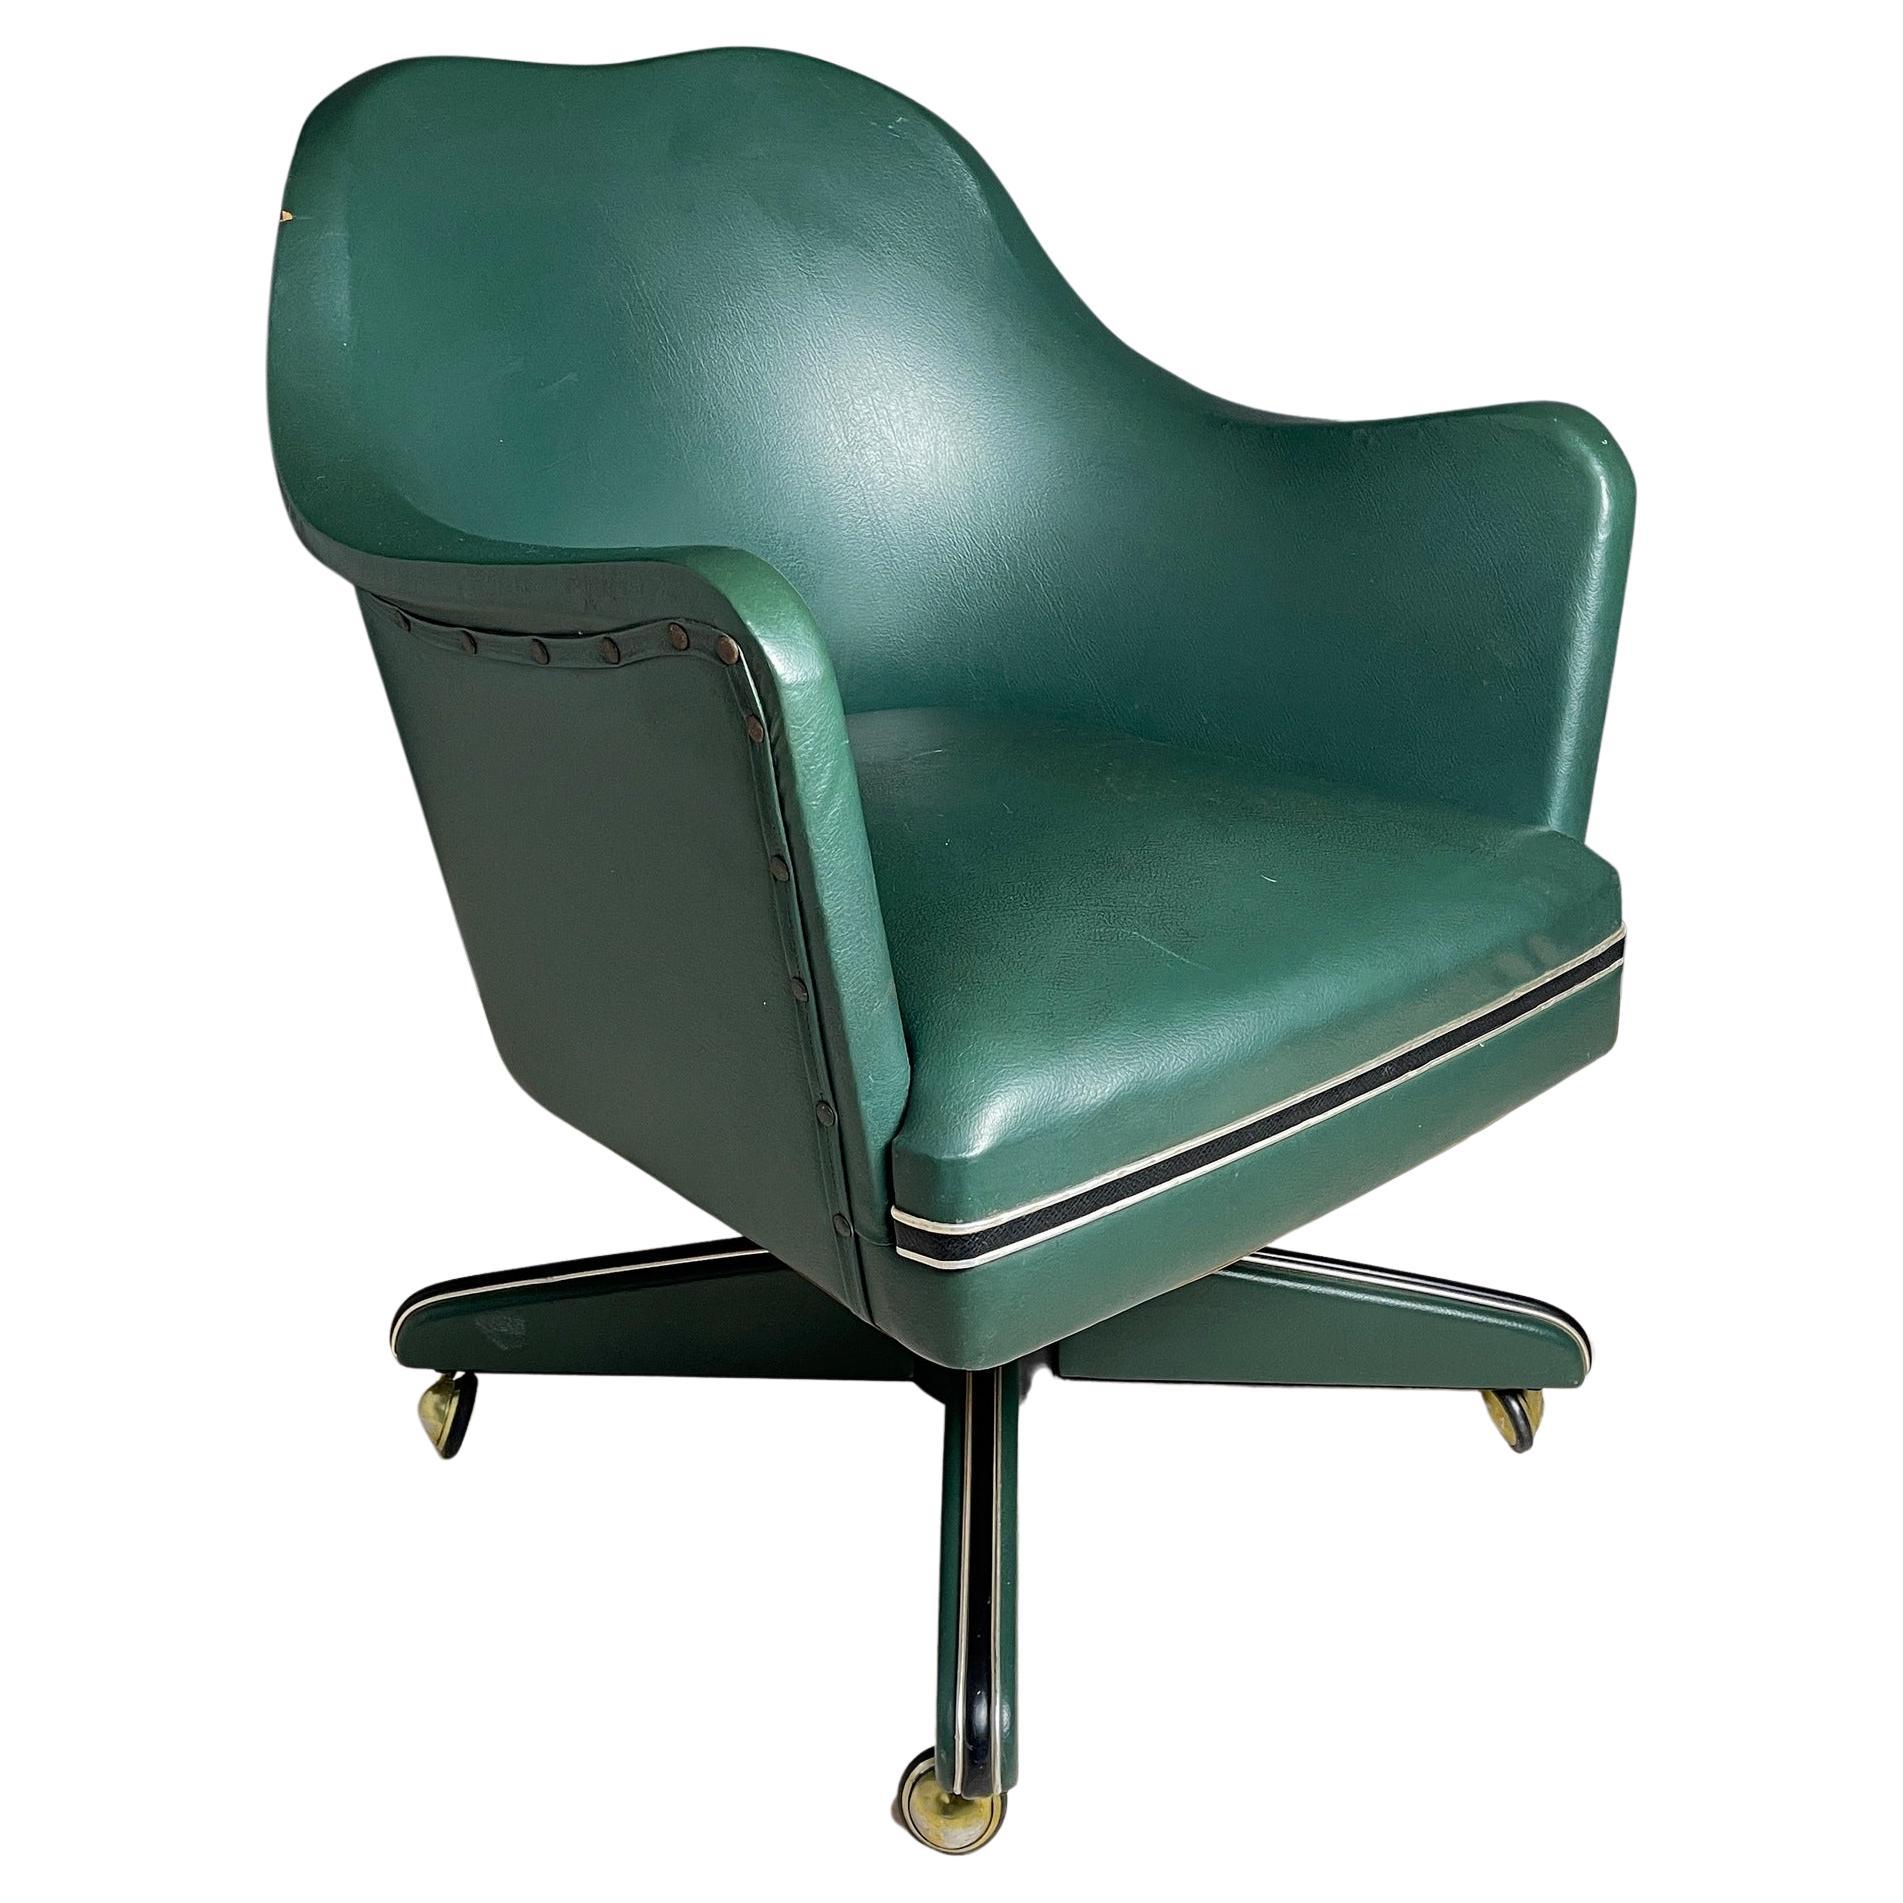 Mid-Century Swivel Green Office Chair by Umberto Mascagni, Italy, 1950s For Sale